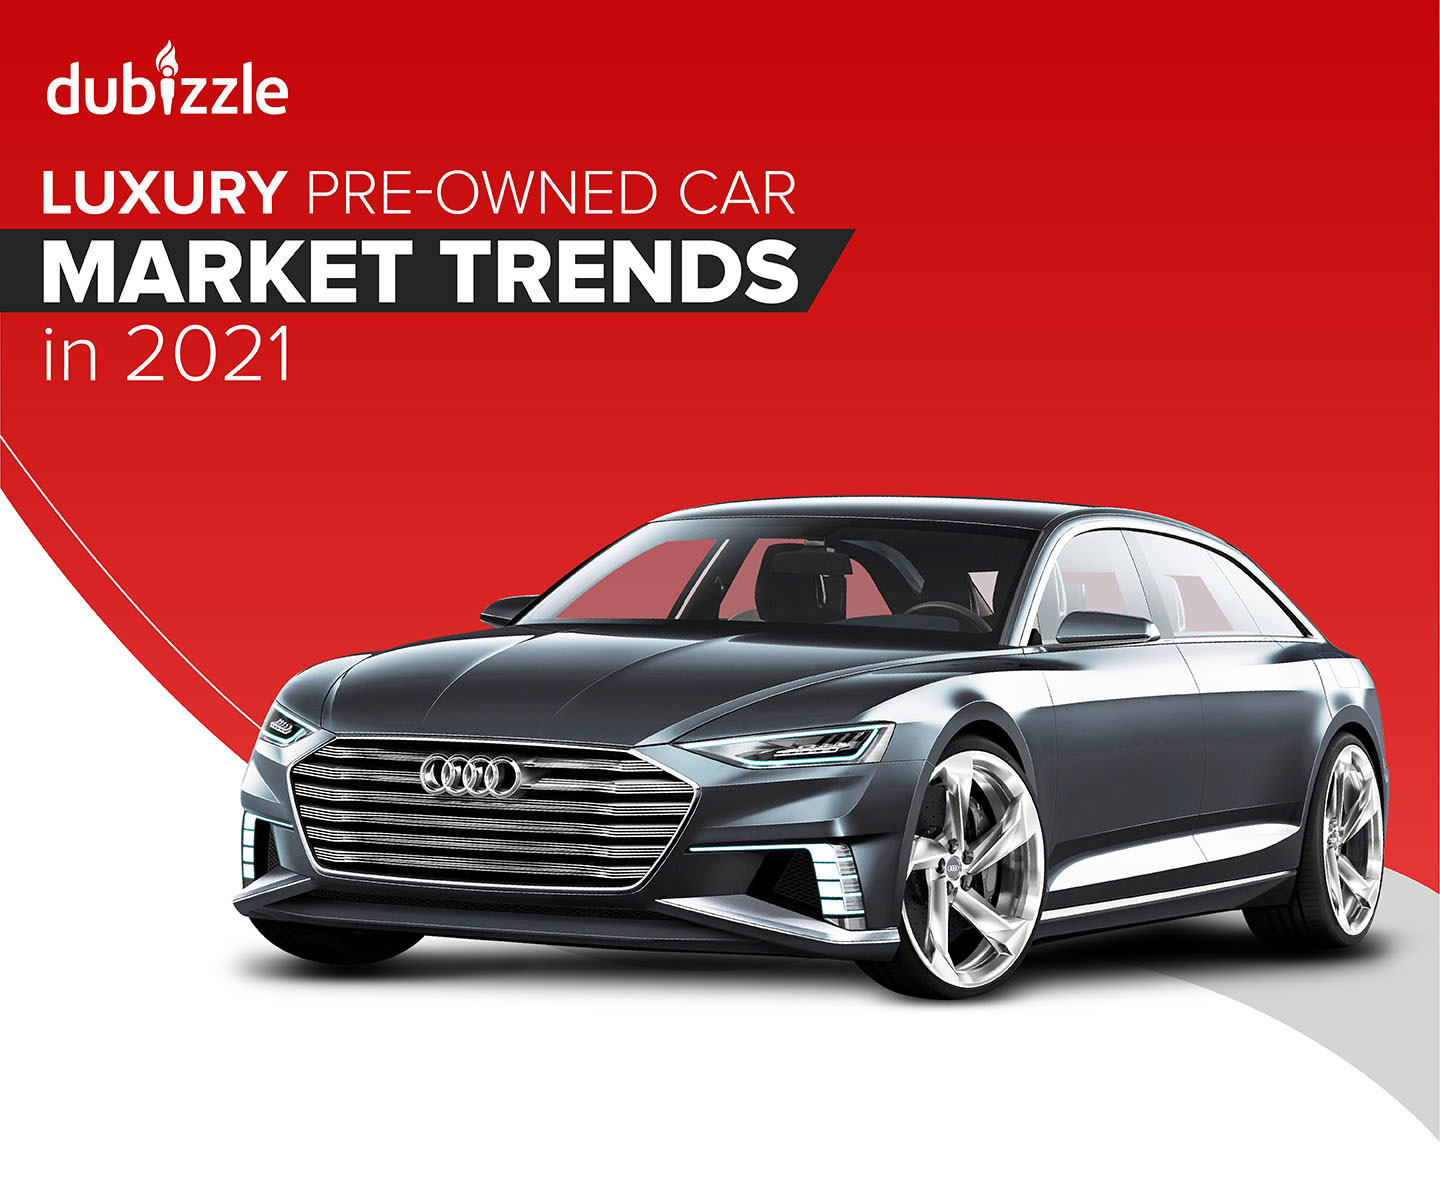 dubizzle’s Pre-Owned Car Market Report for 2021 UAE Car Buyers Show Remarkable Shift to Pre-Owned Car Market